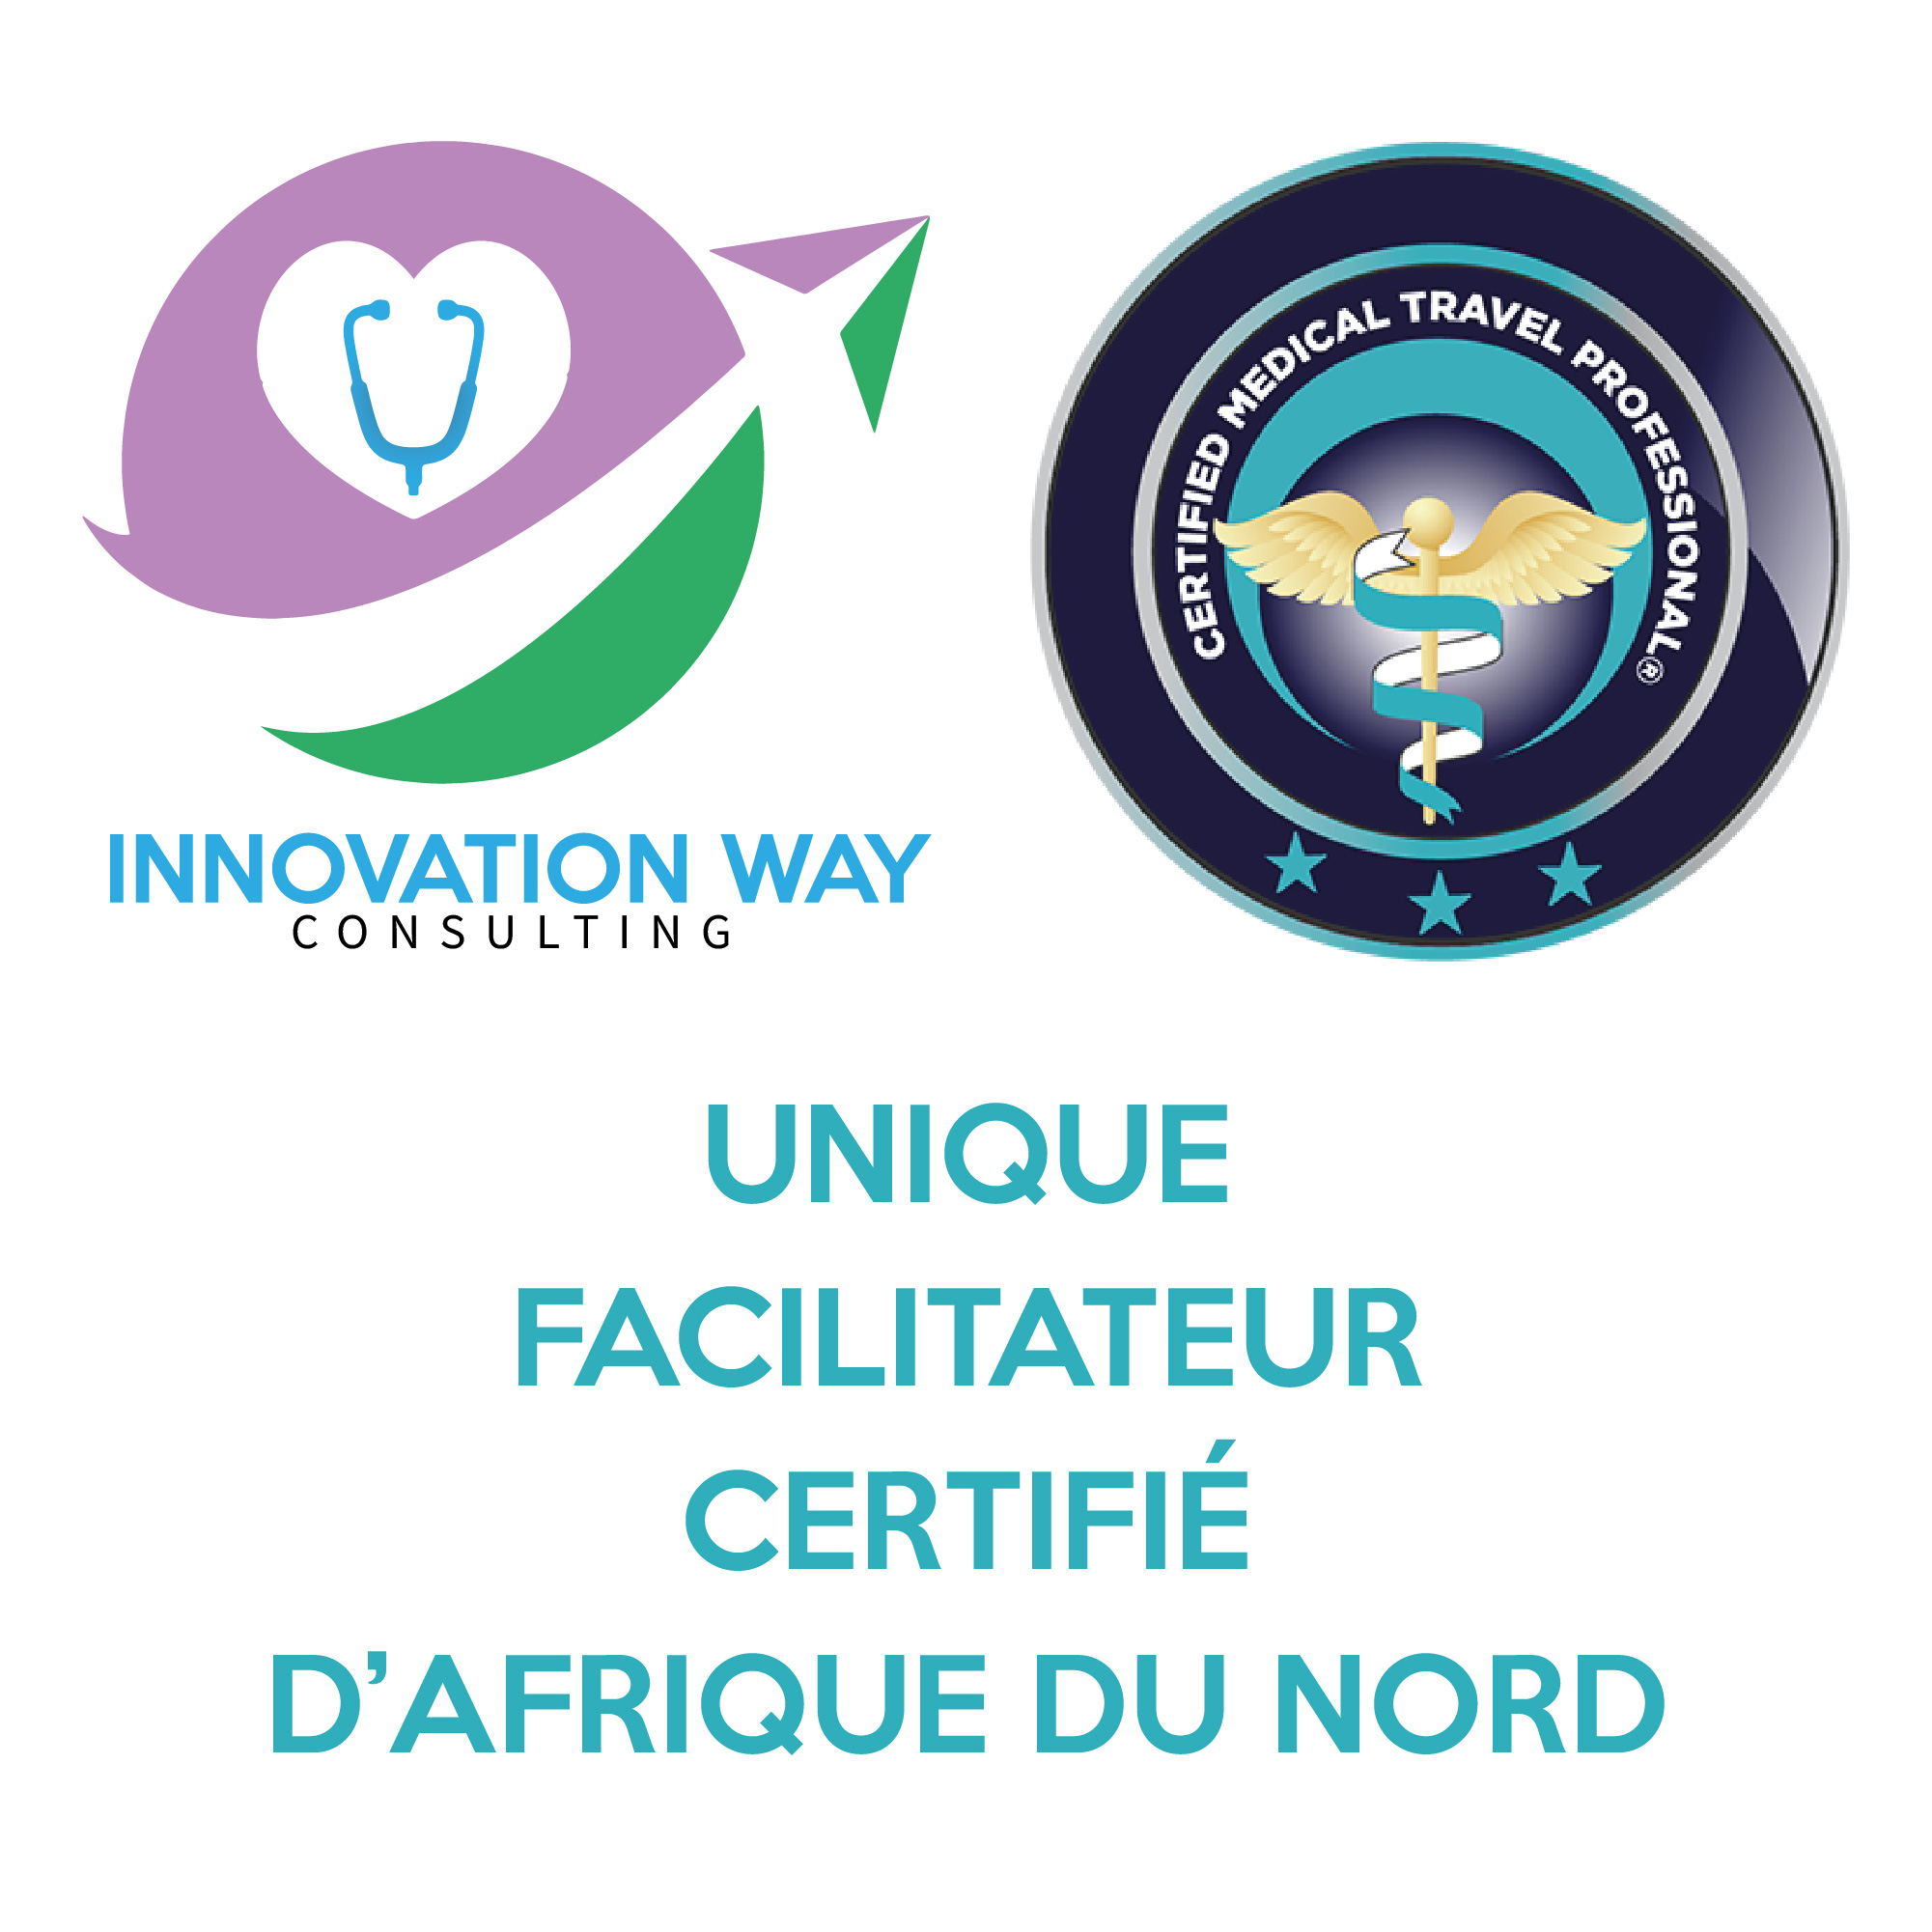 InnovationWay Consulting